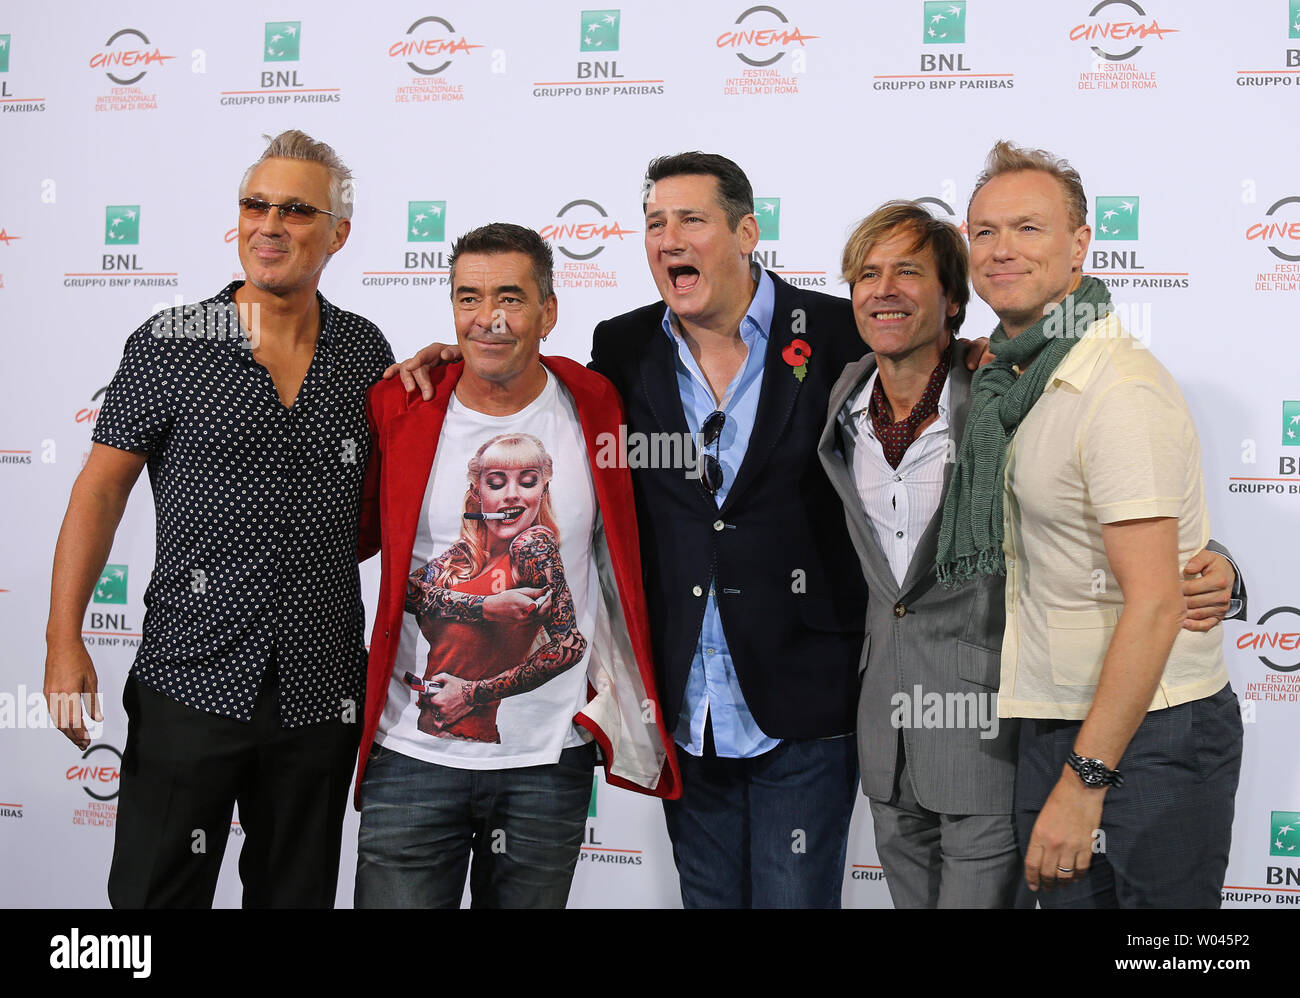 (From L to R) Martin Kemp, John Keeble, Tony Hadley, Steve Norman and Gary Kemp of Spandau Ballet arrive at a photo call for the film 'Soul Boys of the Western World' during the 9th annual Rome International Film Festival in Rome on October 20, 2014.   UPI/David Silpa Stock Photo